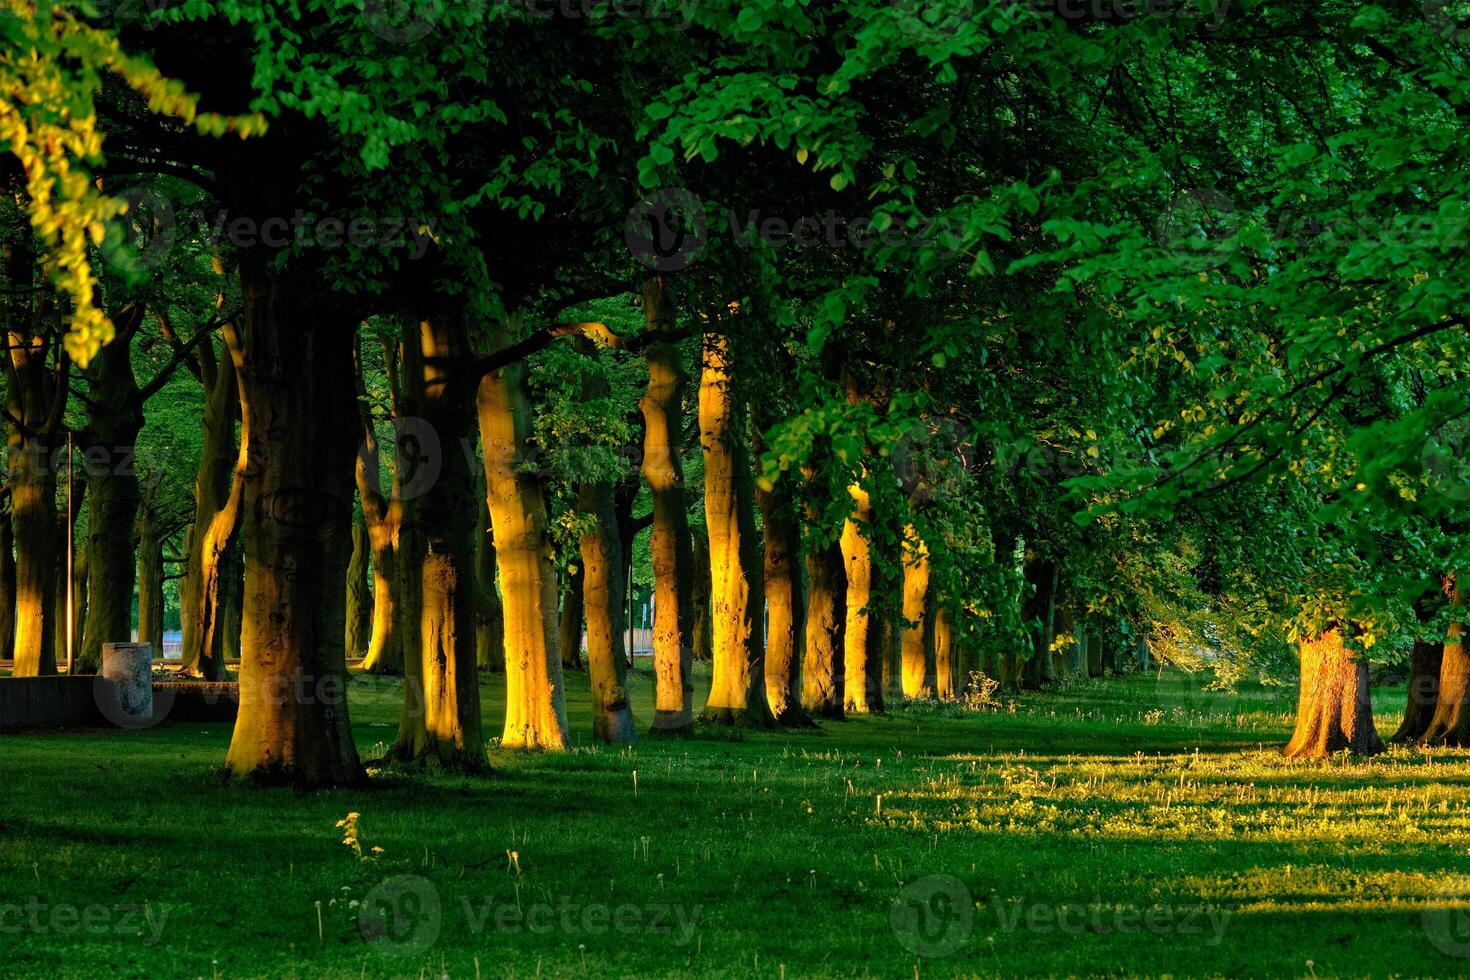 Green alley with trees with lush leaves foliage in summer on sunset photo